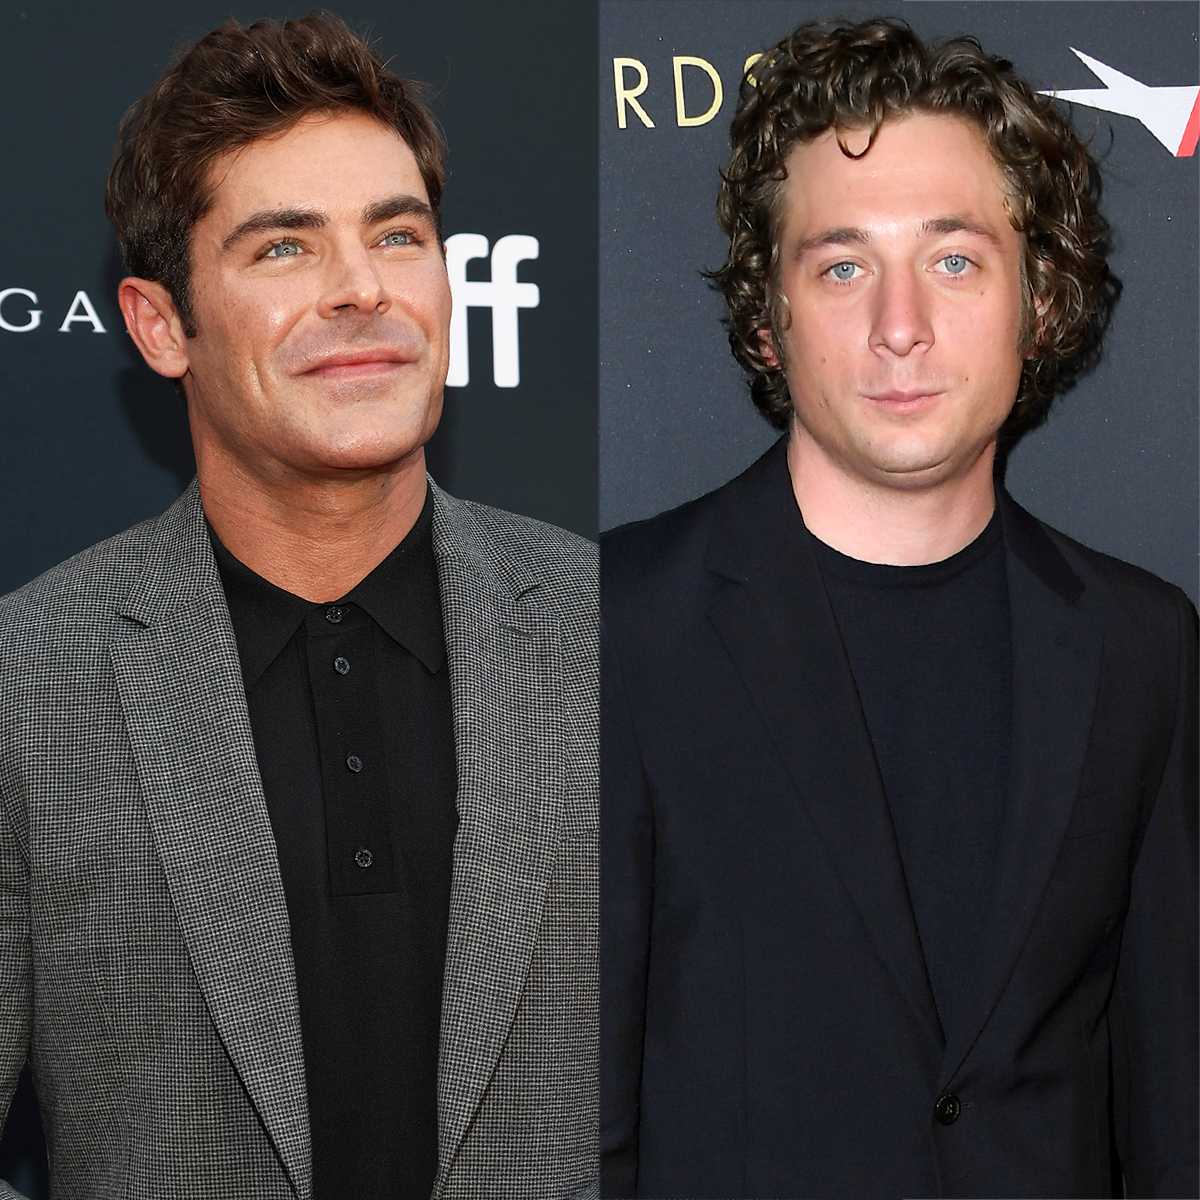 See a New Look Into Zac Efron & Jeremy Allen White’s Wrestling Movie